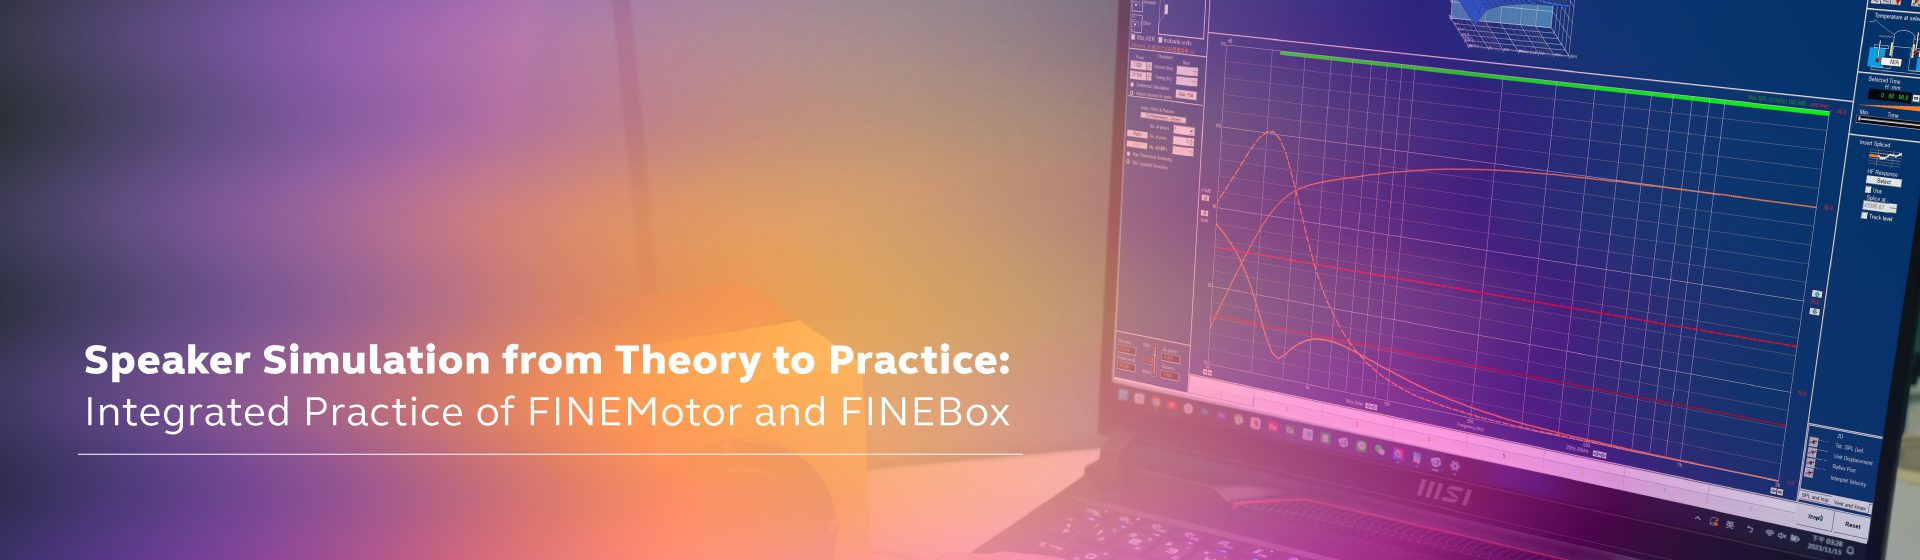 Speaker Simulation from Theory to Practice: Integrated Practice of FINEBox and FINEMotor